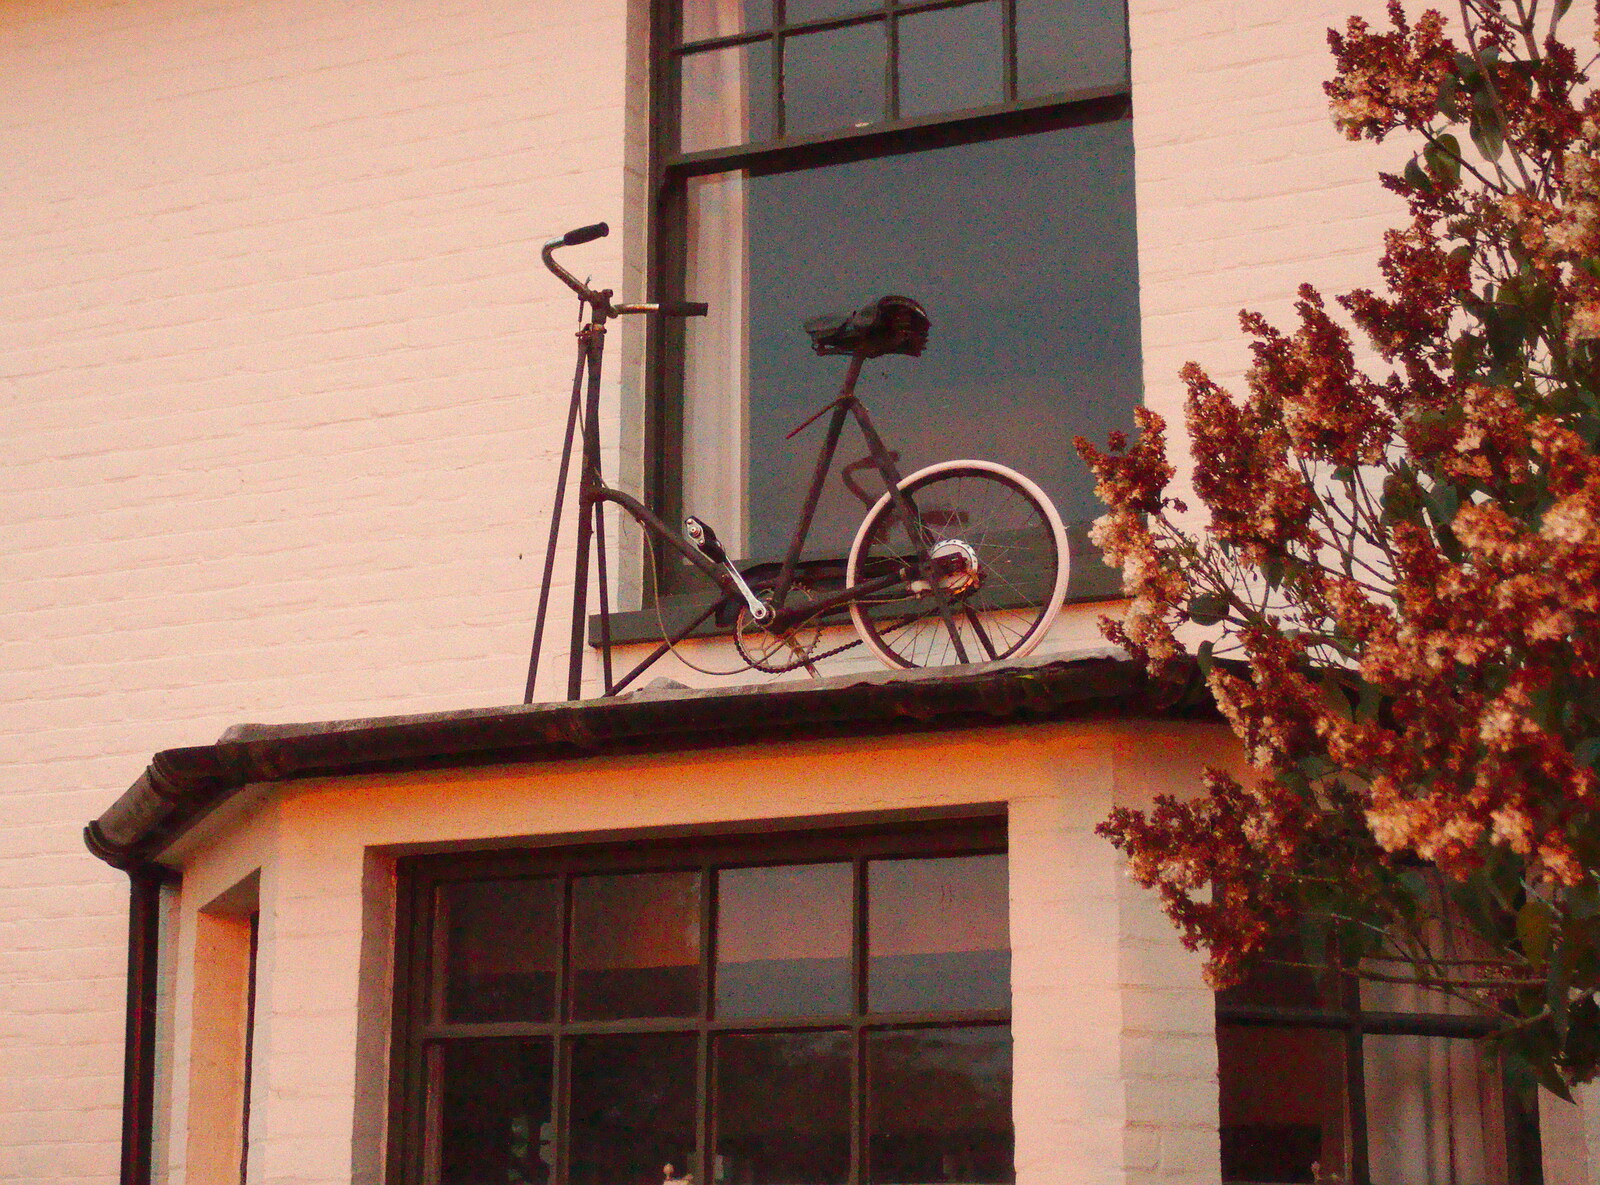 The BSCC at the Railway Tavern, Mellis, Suffolk - 28th May 2014: A bicycle sculpture